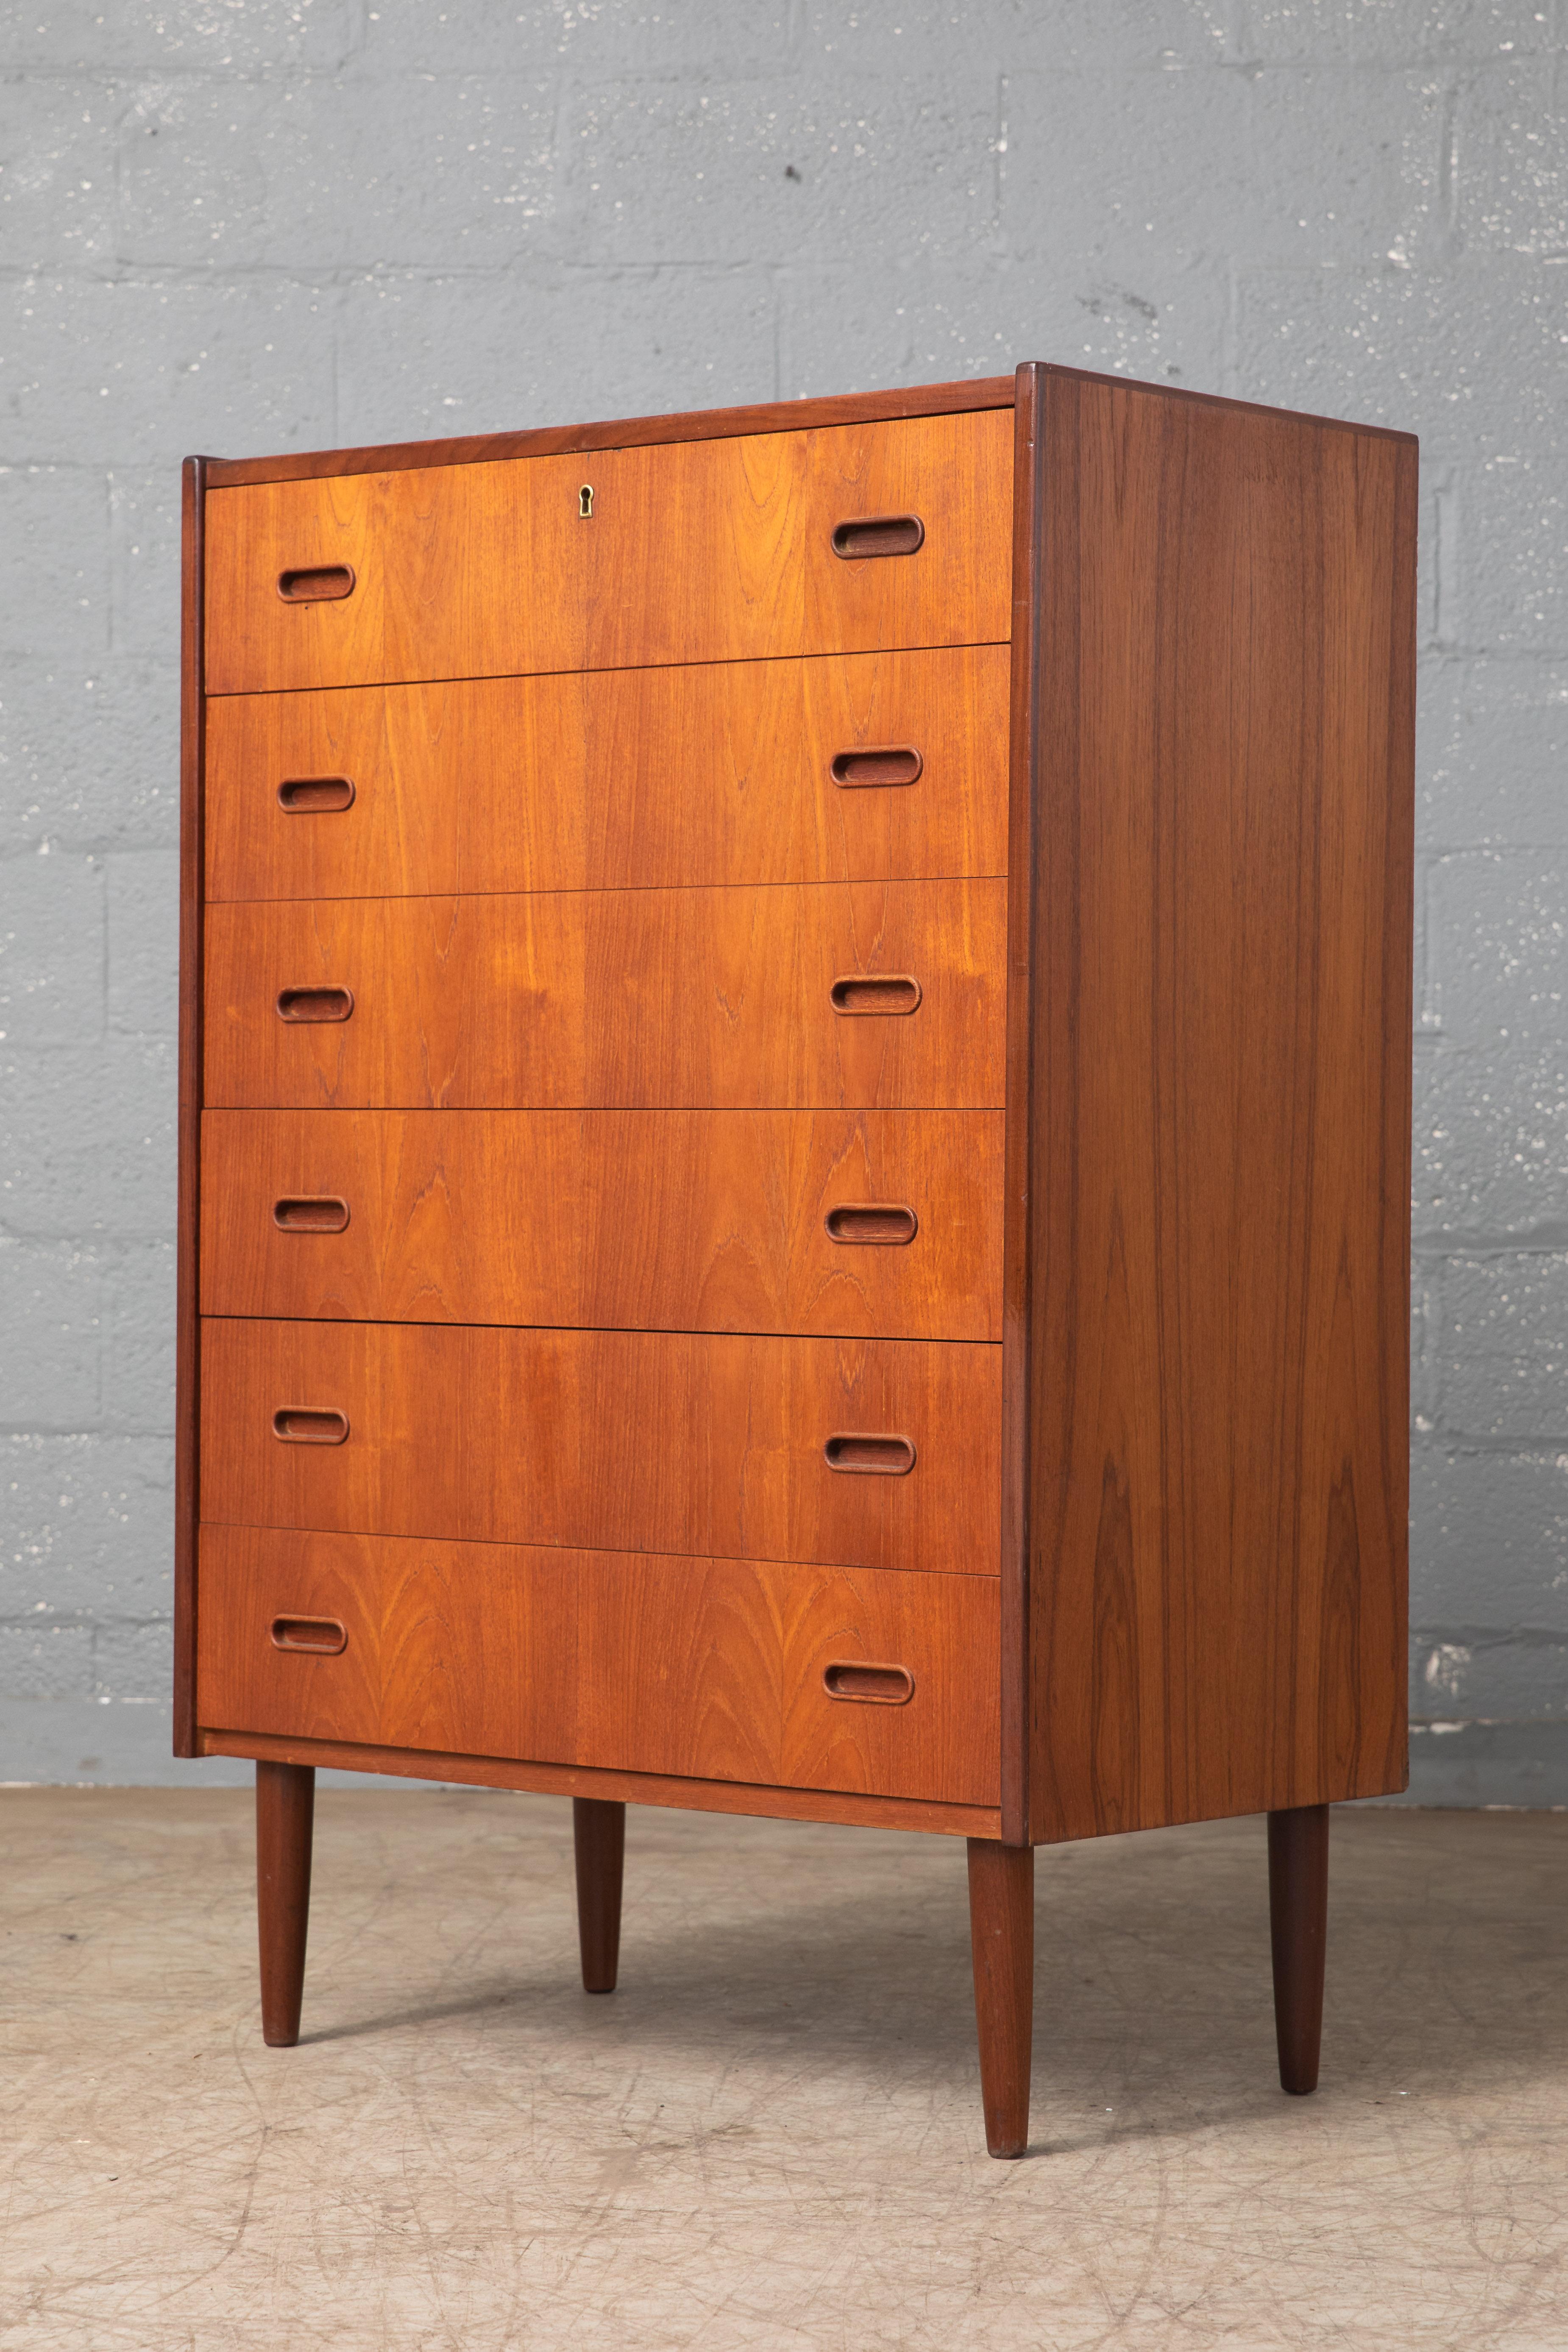 Beautiful Danish 1960s teak tall dresser or chest or drawers in the style of Kai Kristiansen. Sharp distinct design lines. Teak veneer with edges of solid teak and pulls carved from solid teak raised on solid tapered teak legs. Very nice color and